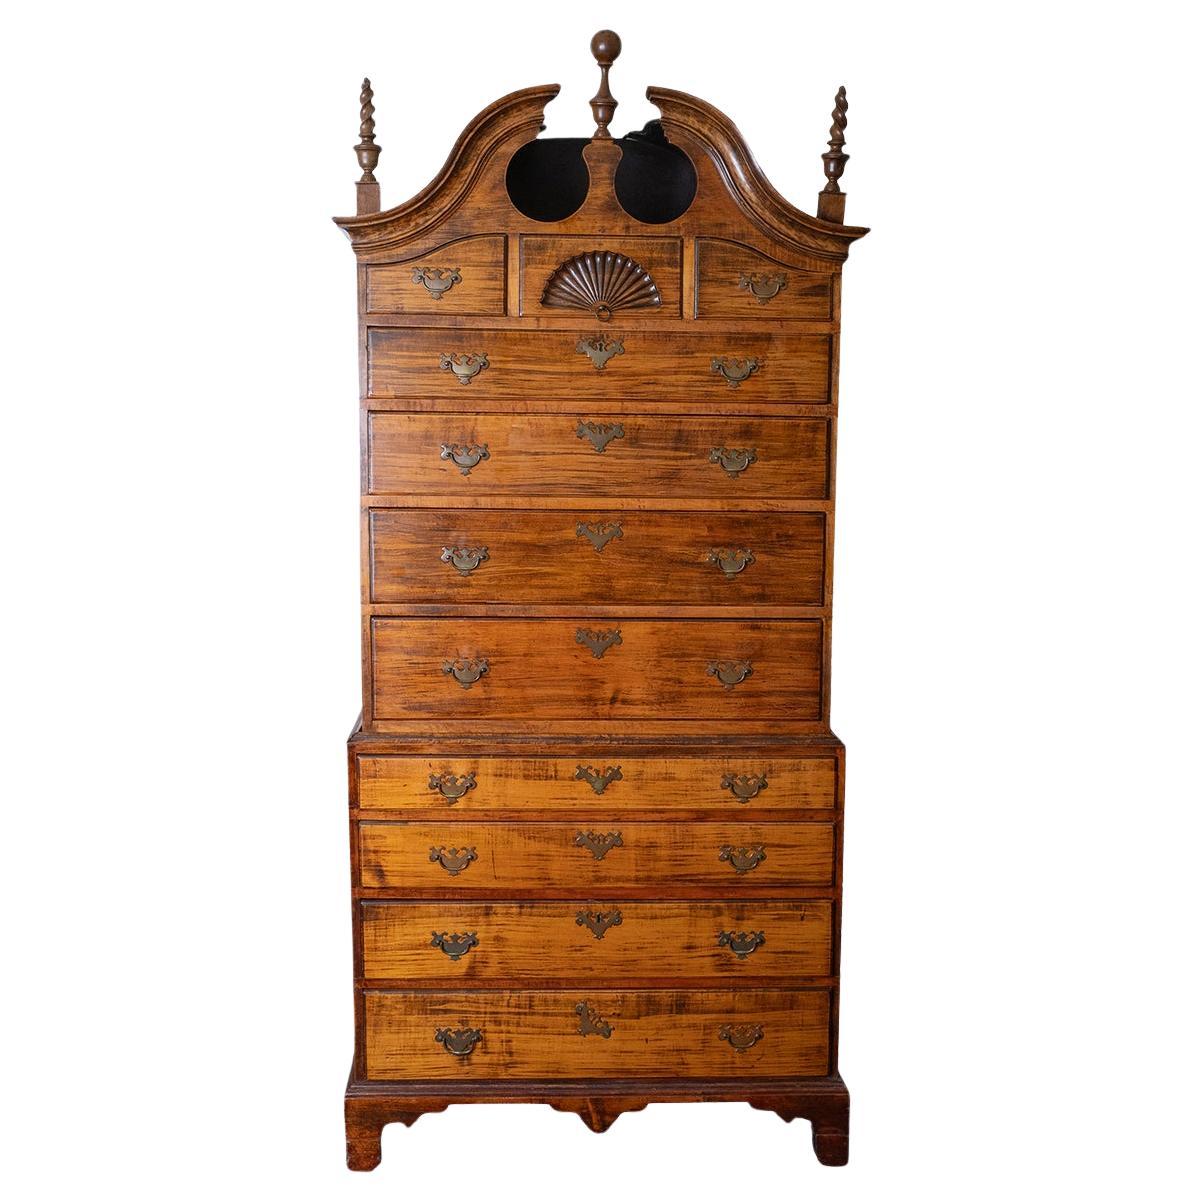 Bonnet top maple highboy chest of drawers